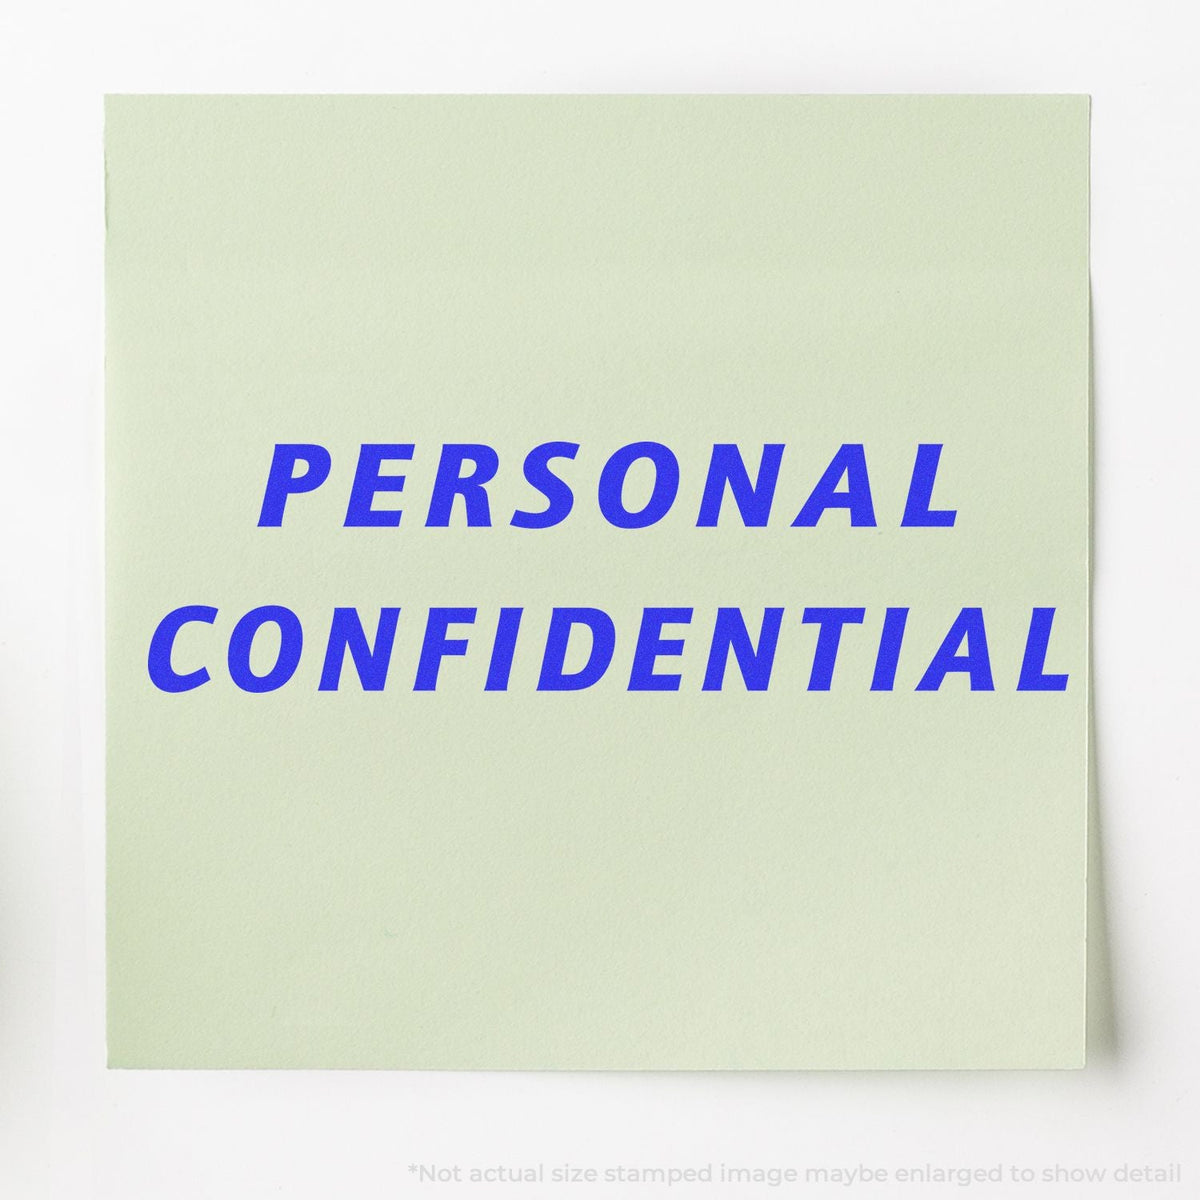 In Use Self-Inking Italic Personal Confidential Stamp Image